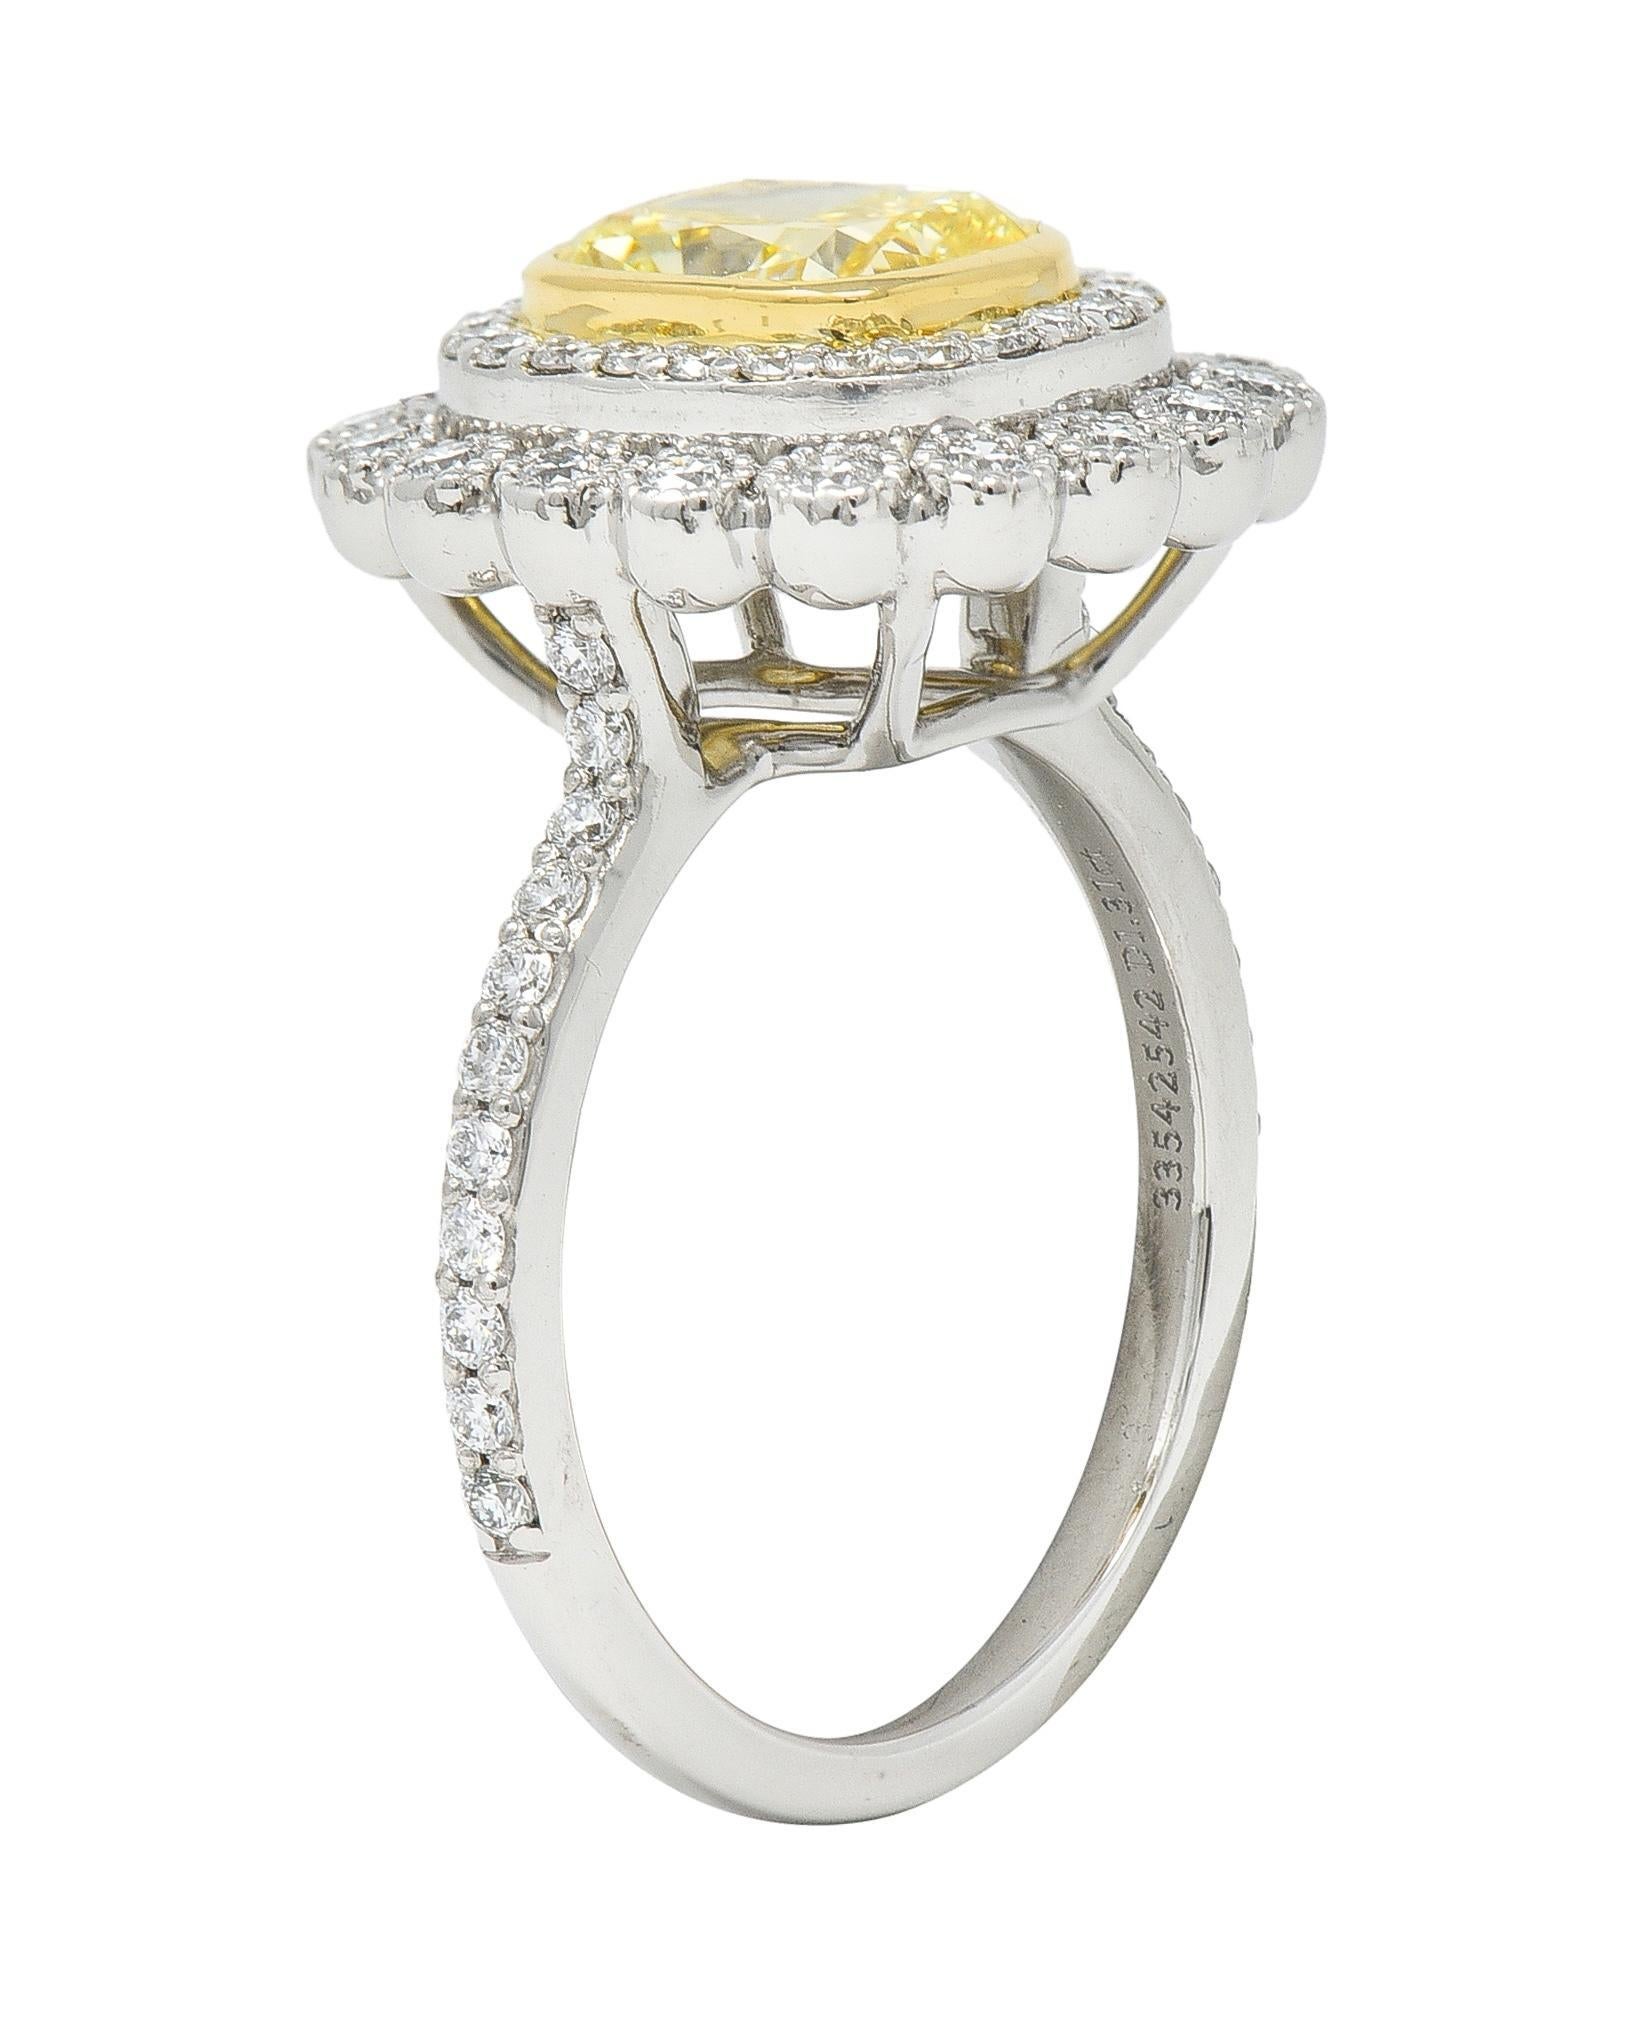 Centering an elongated cushion cut diamond weighing 1.31 carats - fancy intense yellow in color with VS2 clarity
Set in a yellow gold bezel with a tiered halo surround of round brilliant cut diamonds
Bead and bezel set in basket with additional